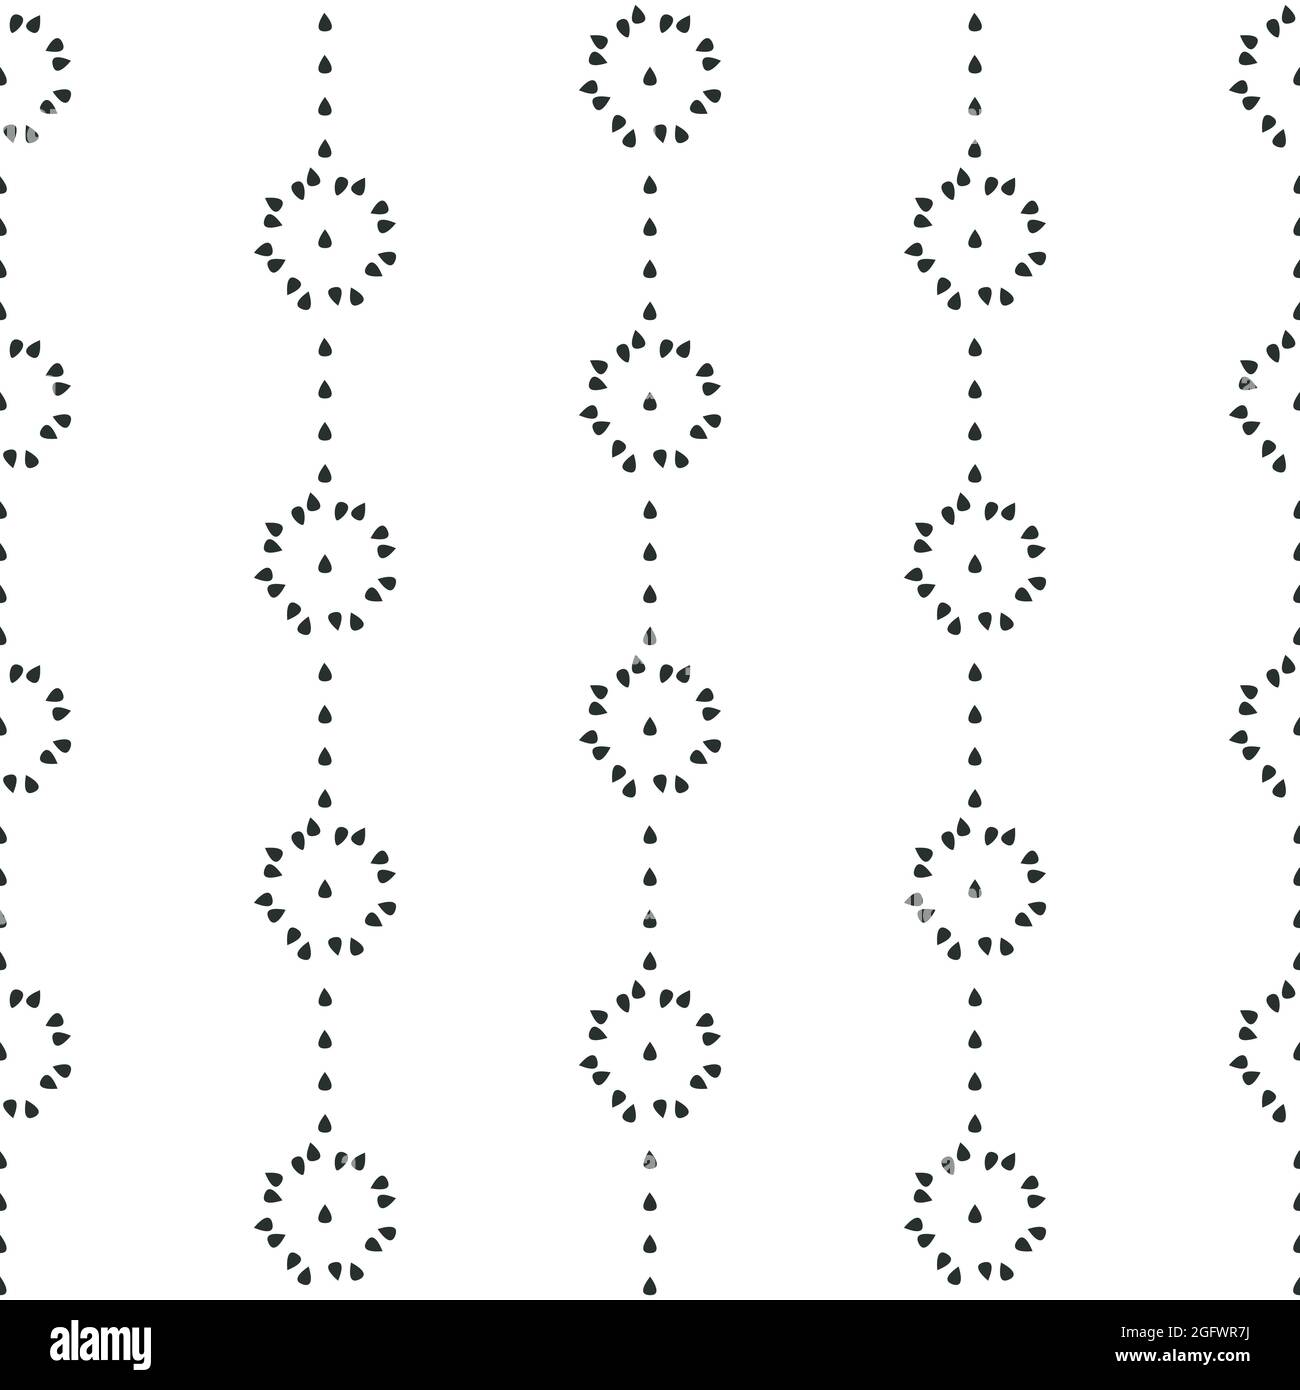 Geometrical monochrome seamless pattern. Black drop shapes. White colore easy editable background. Vector Stock Vector